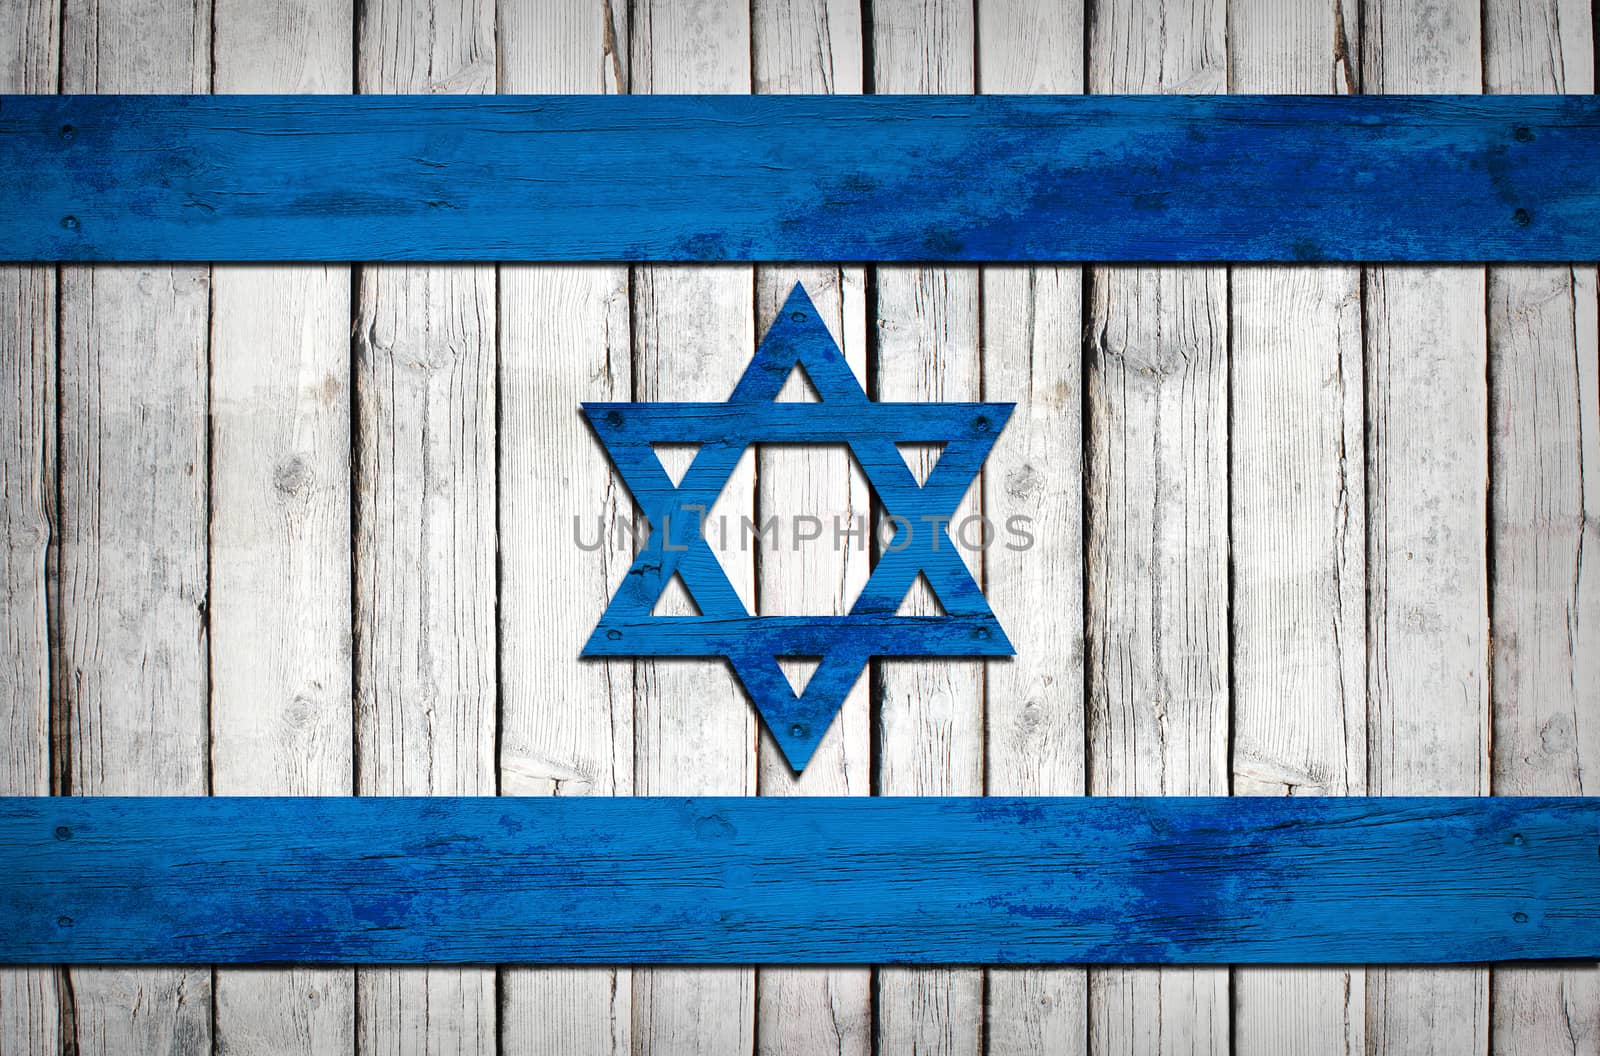 Israeli flag painted on wooden boards. Grunge style